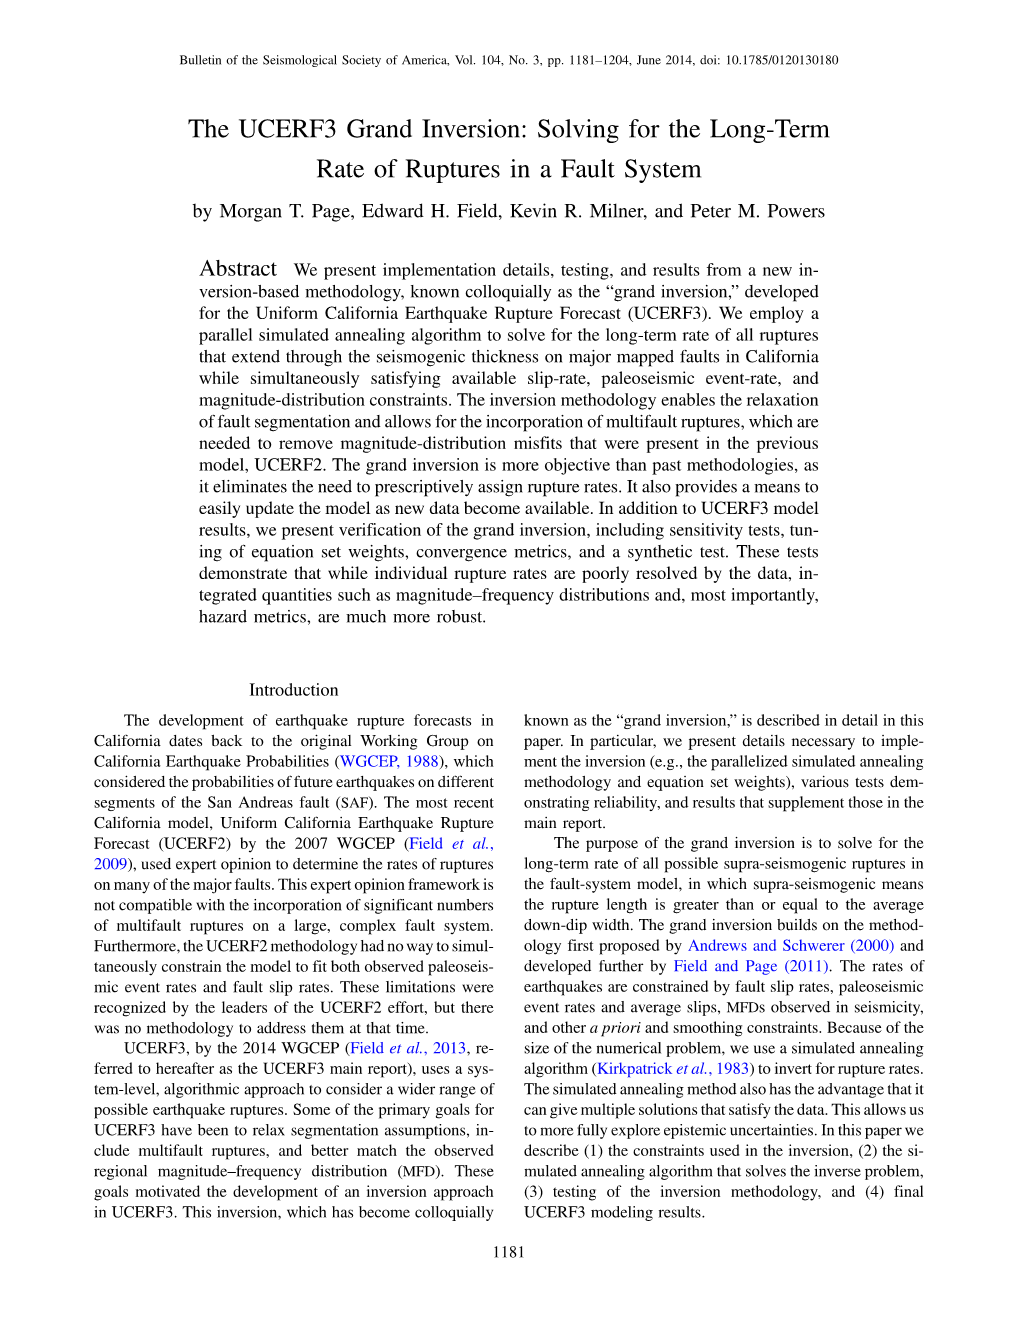 The UCERF3 Grand Inversion: Solving for the Long-Term Rate of Ruptures in a Fault System by Morgan T